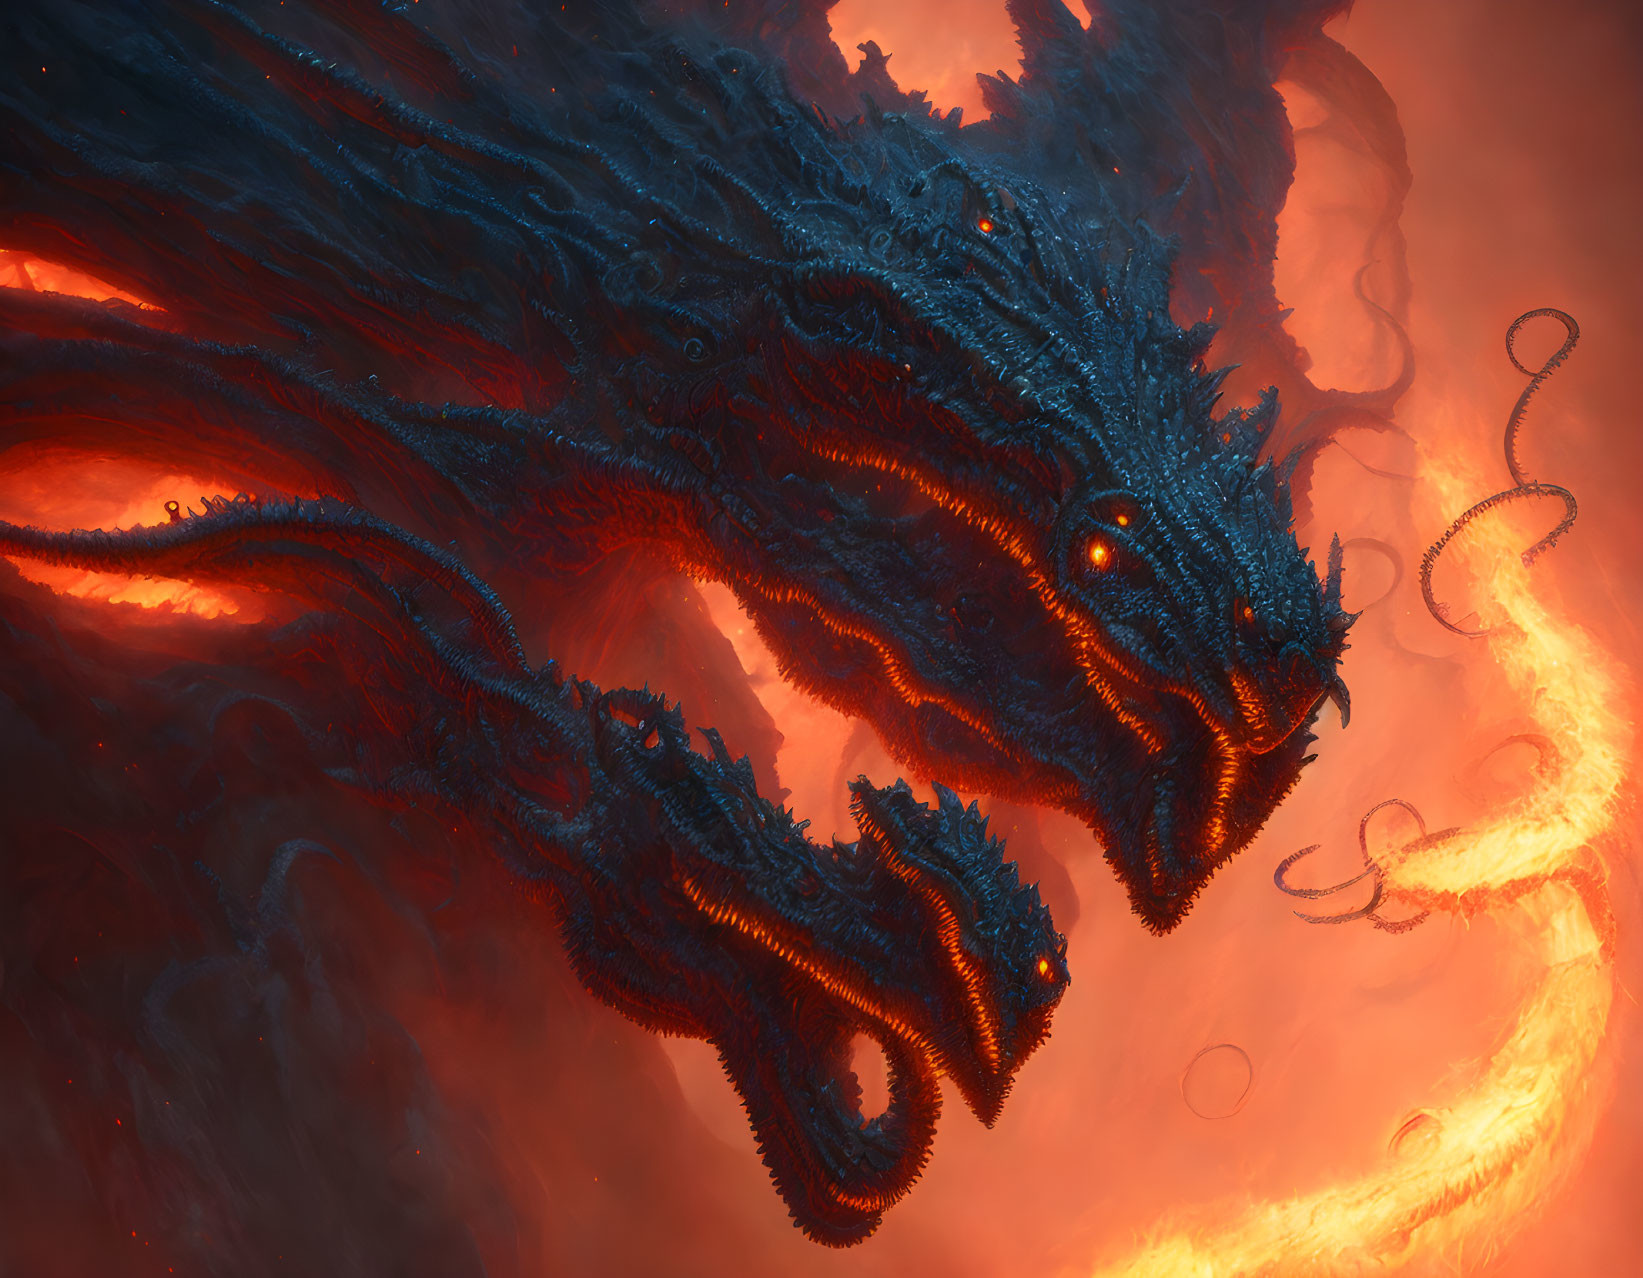 Detailed Blue Dragon Artwork Surrounded by Fiery Clouds